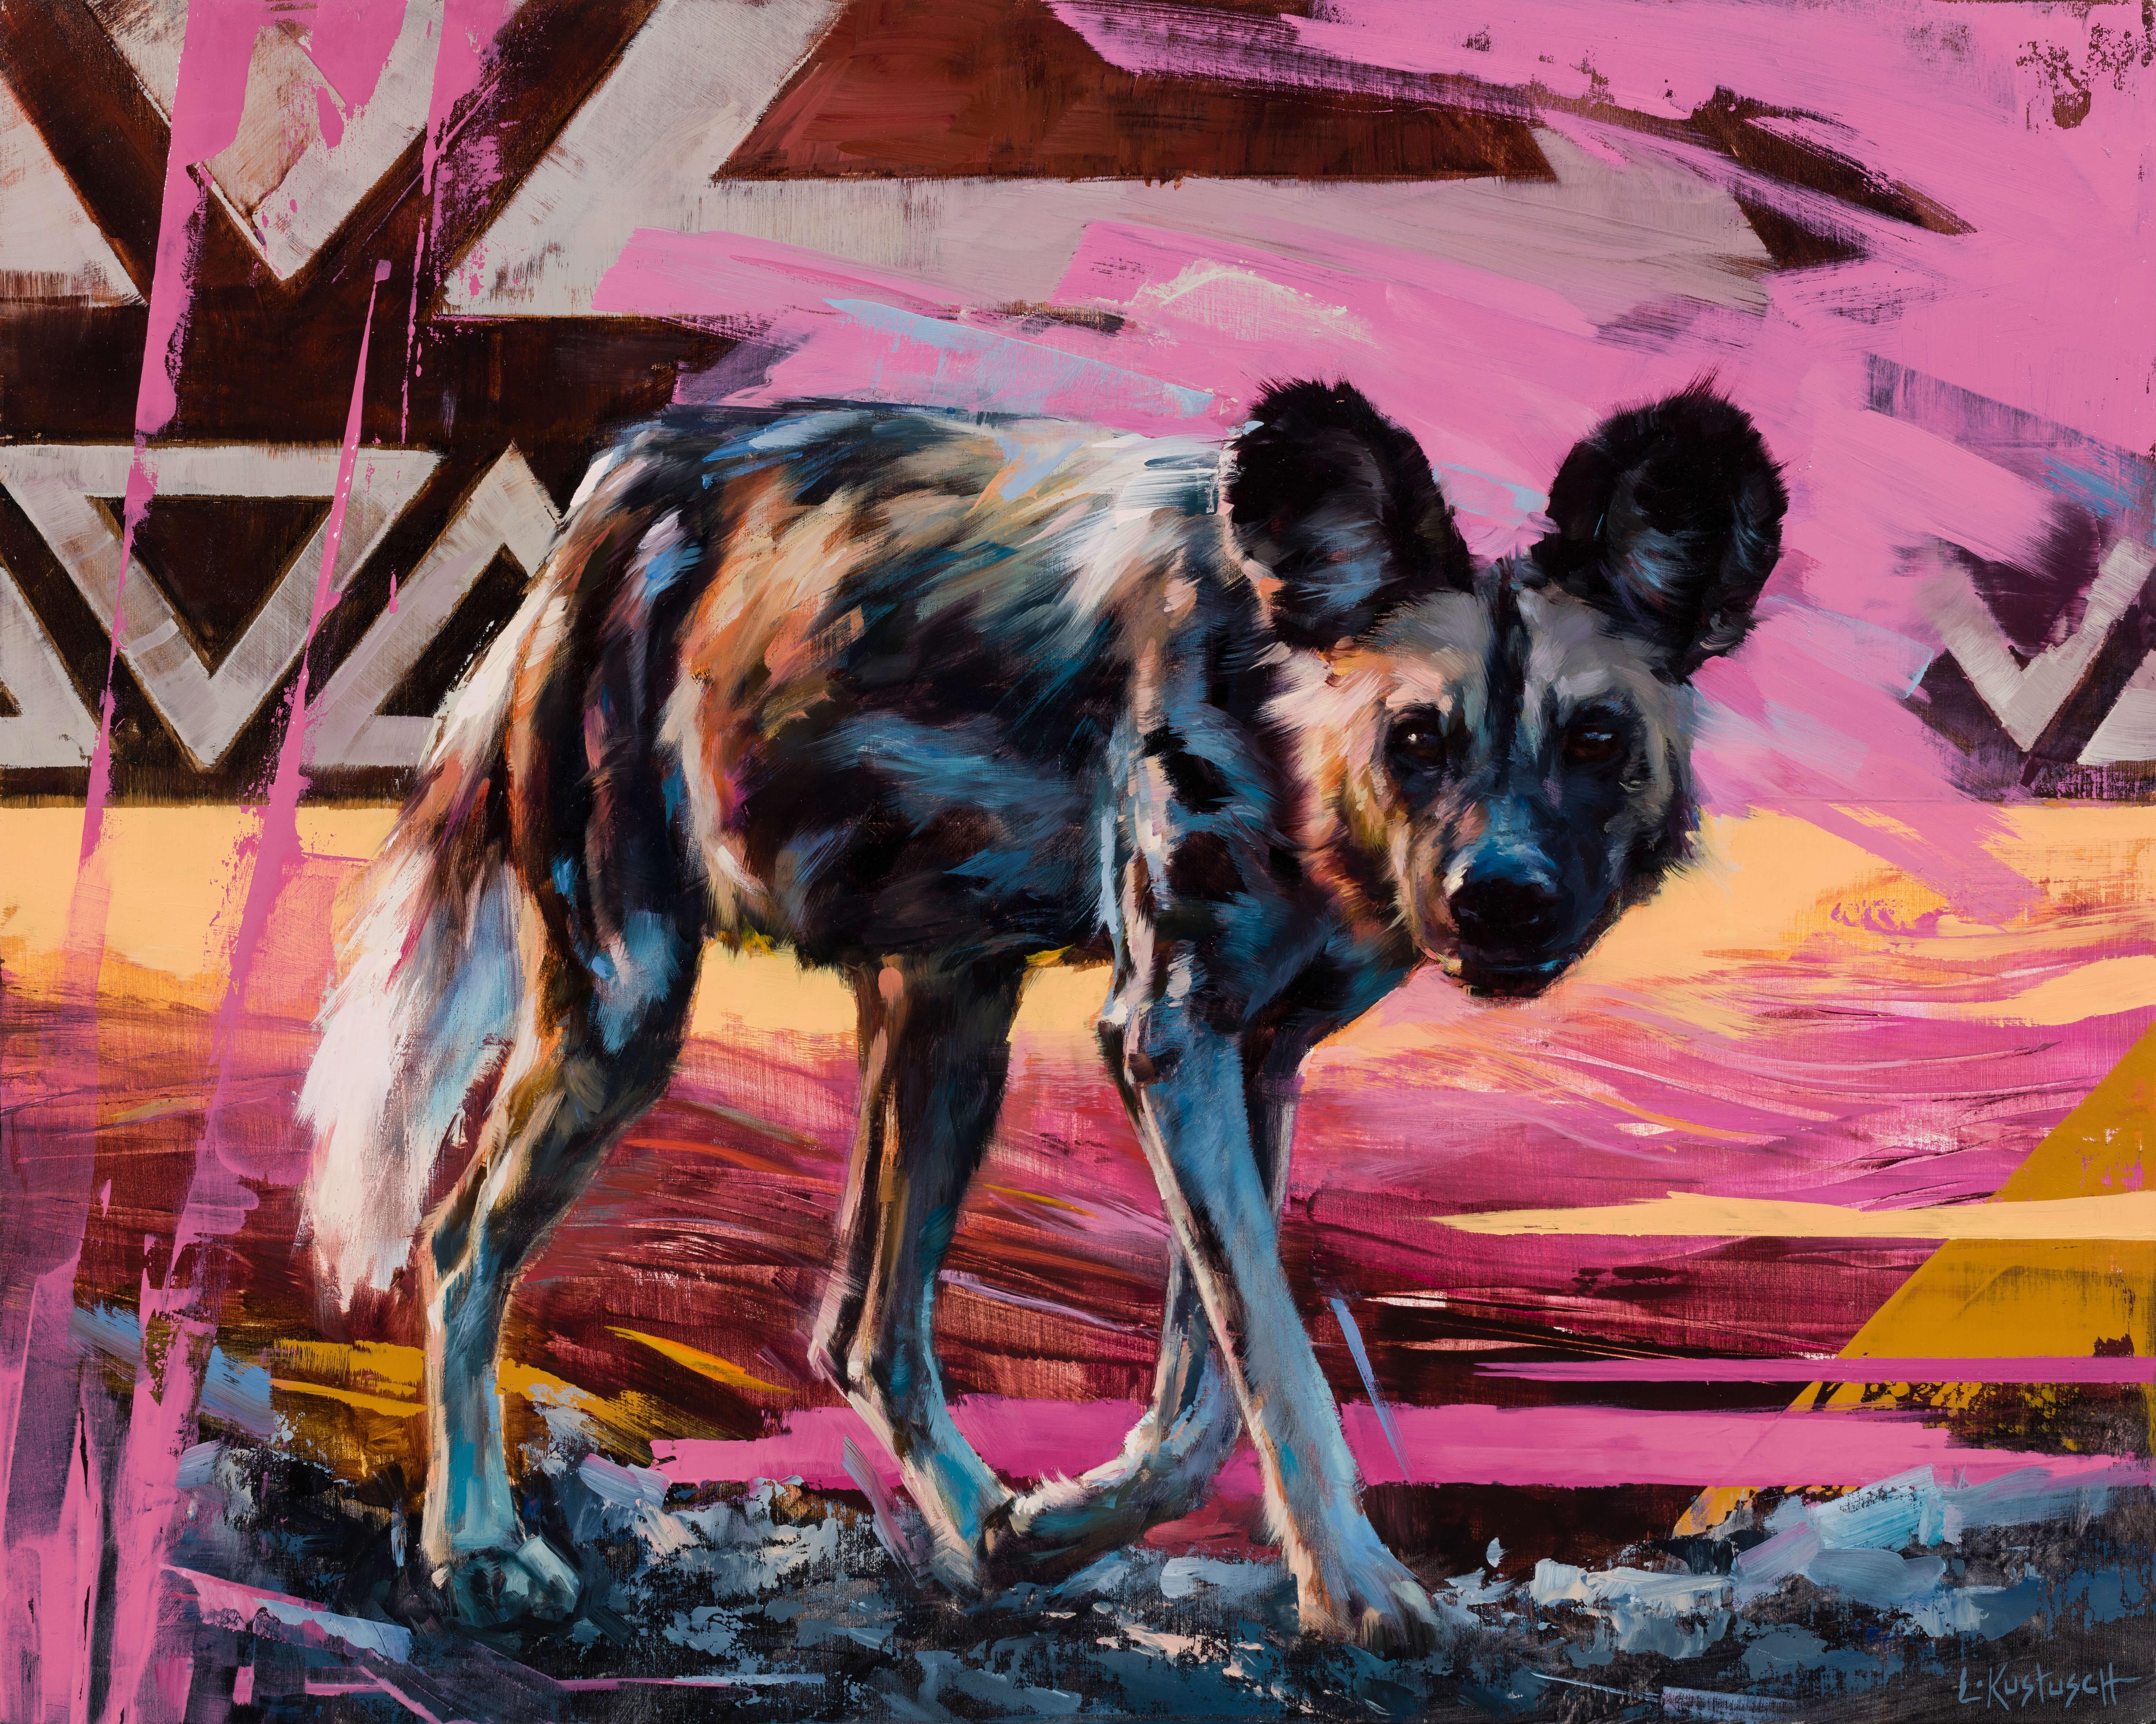 Lindsey Kustusch Figurative Painting - "The Painted Dog" Original Oil Painting